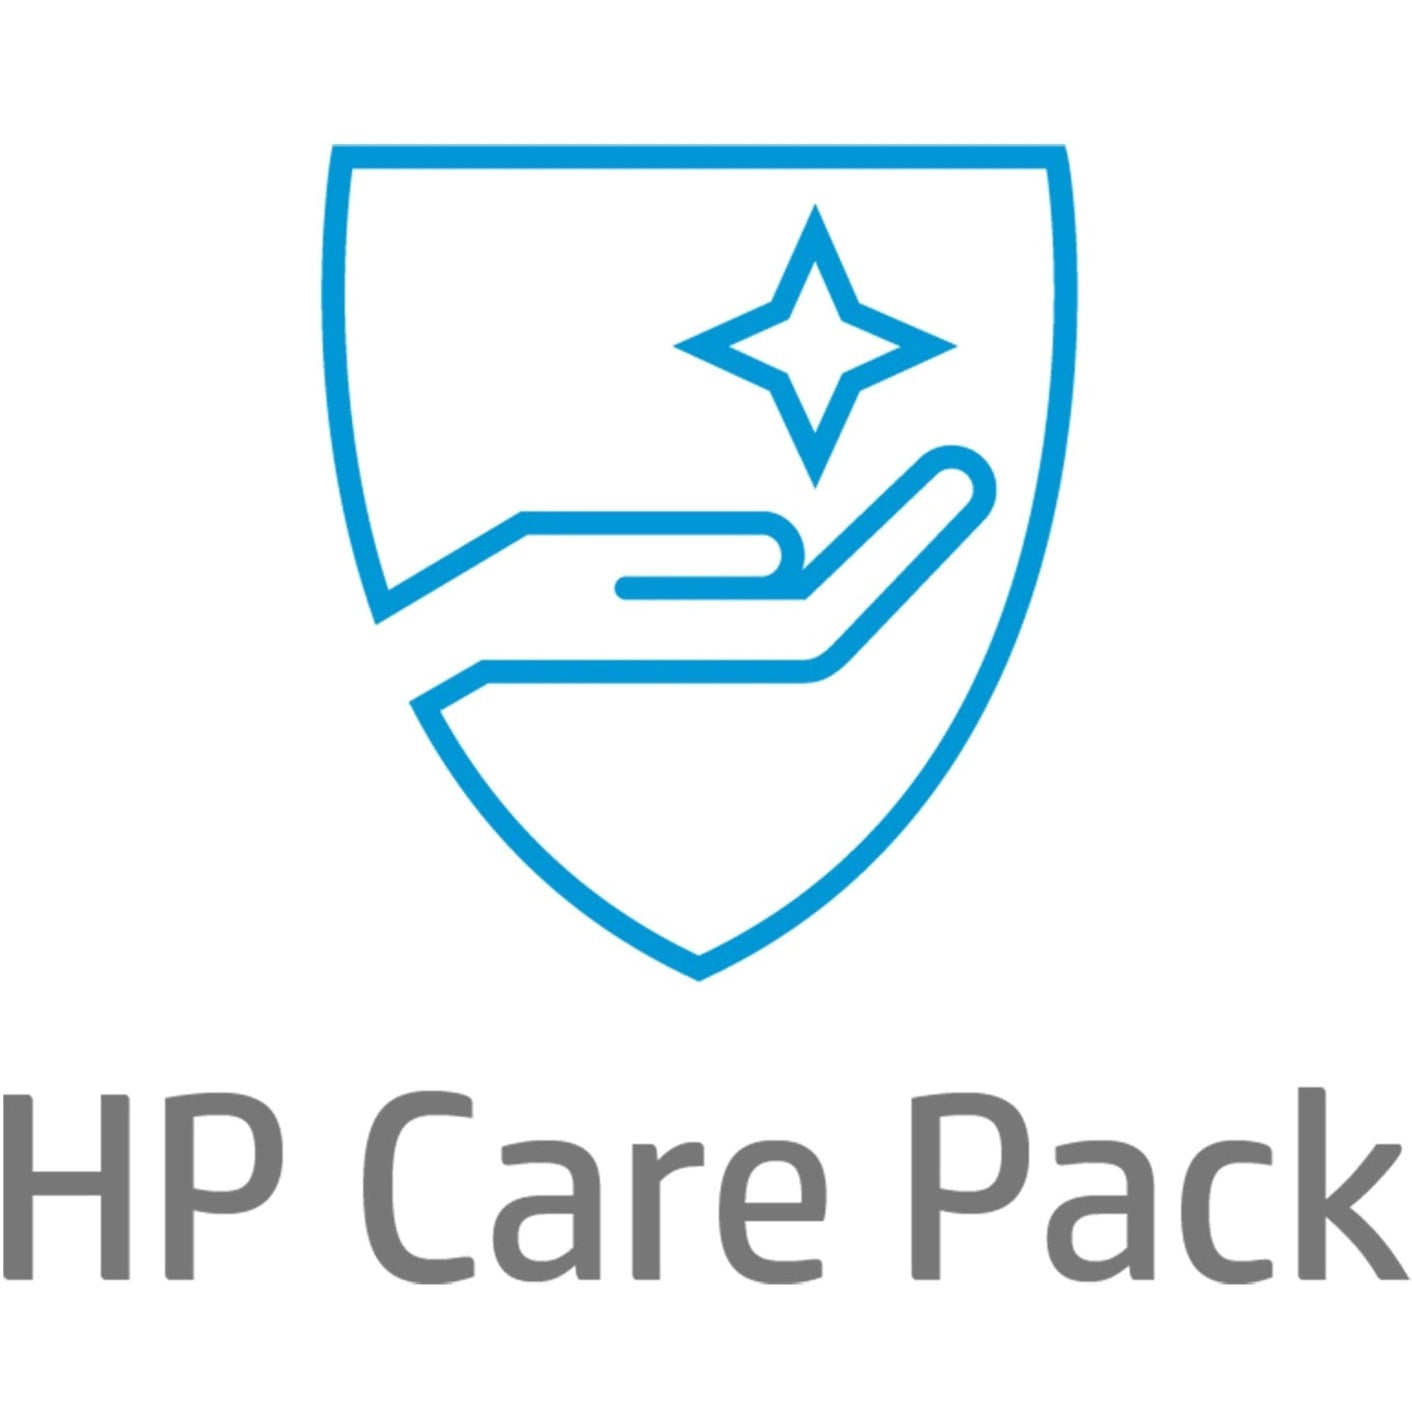 HP Care Pack - Extended Service - 3 Year - Service (U9EE3E)